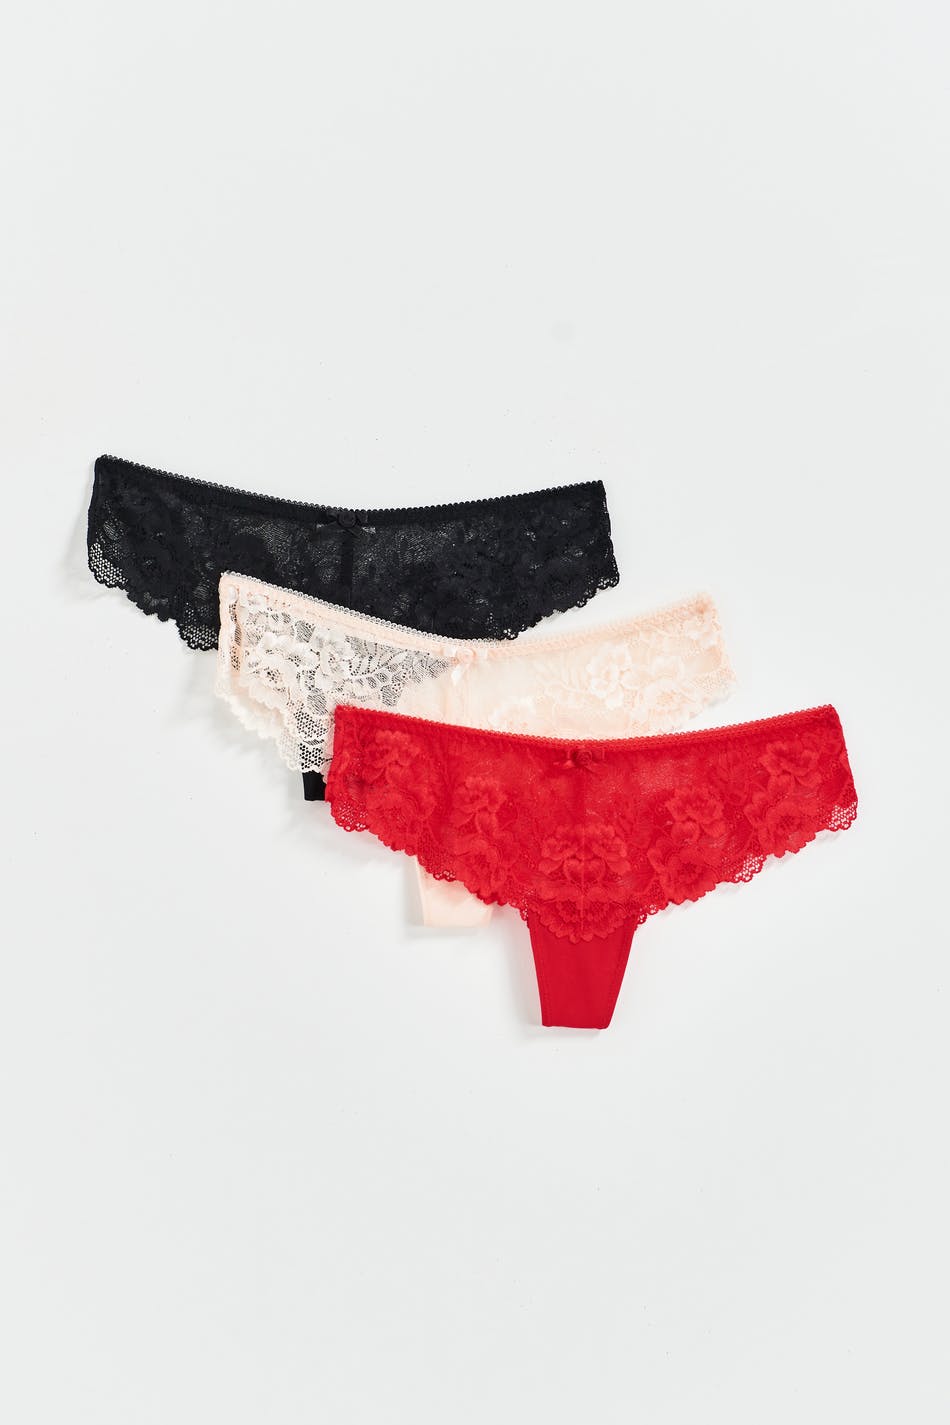 Lace thong - Red - Women - Gina Tricot